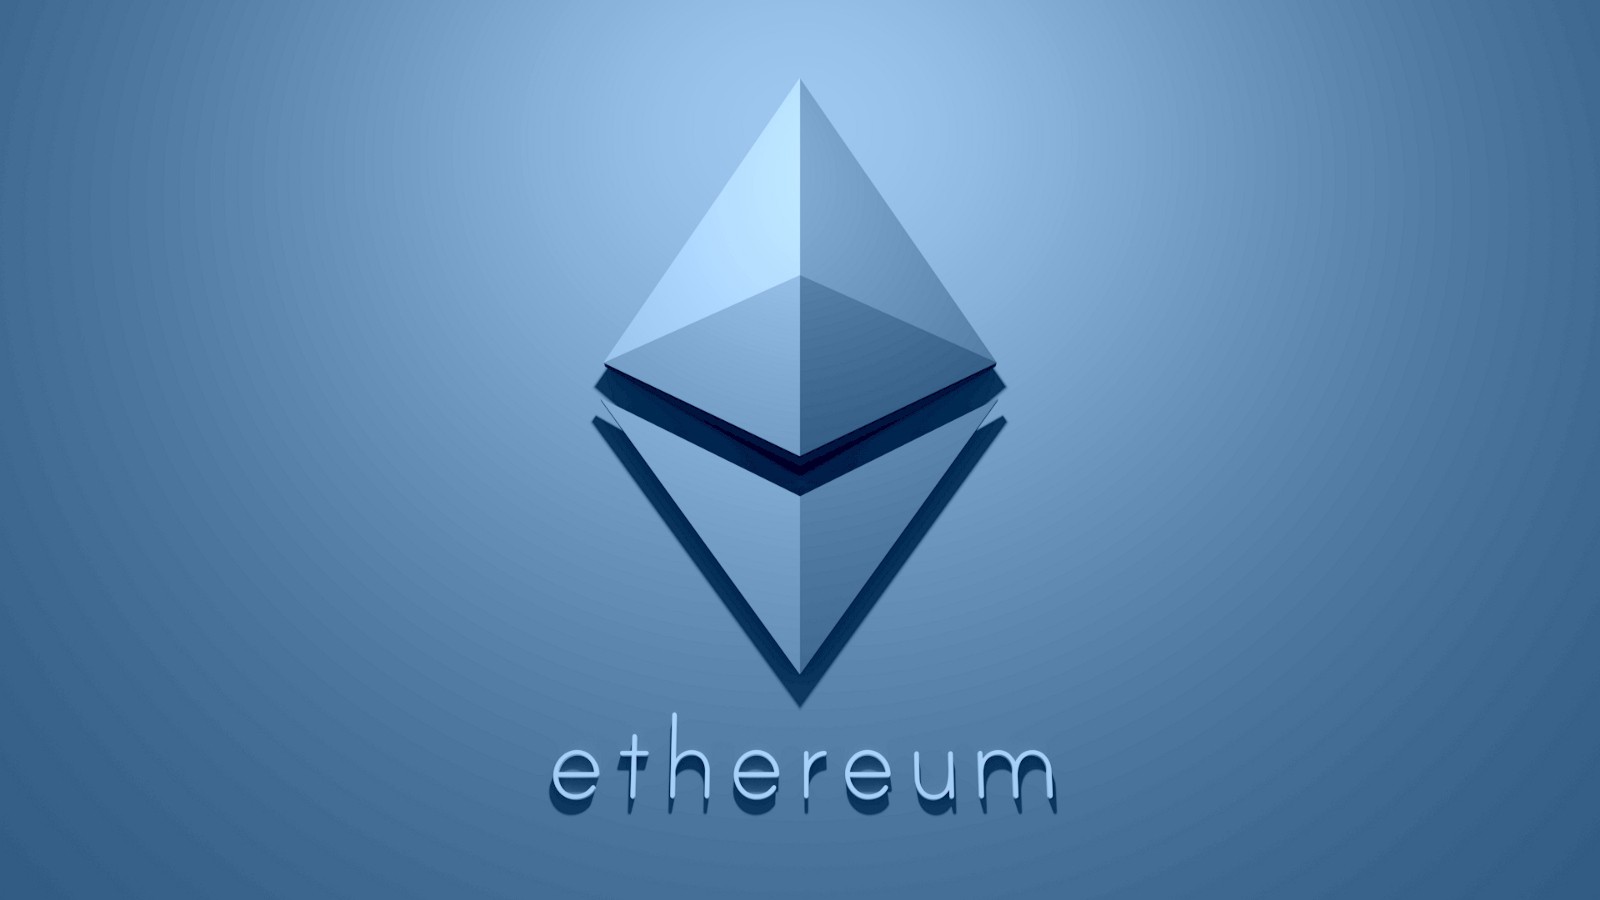 Ethereum Foundation Launches Exciting New Web3 Project